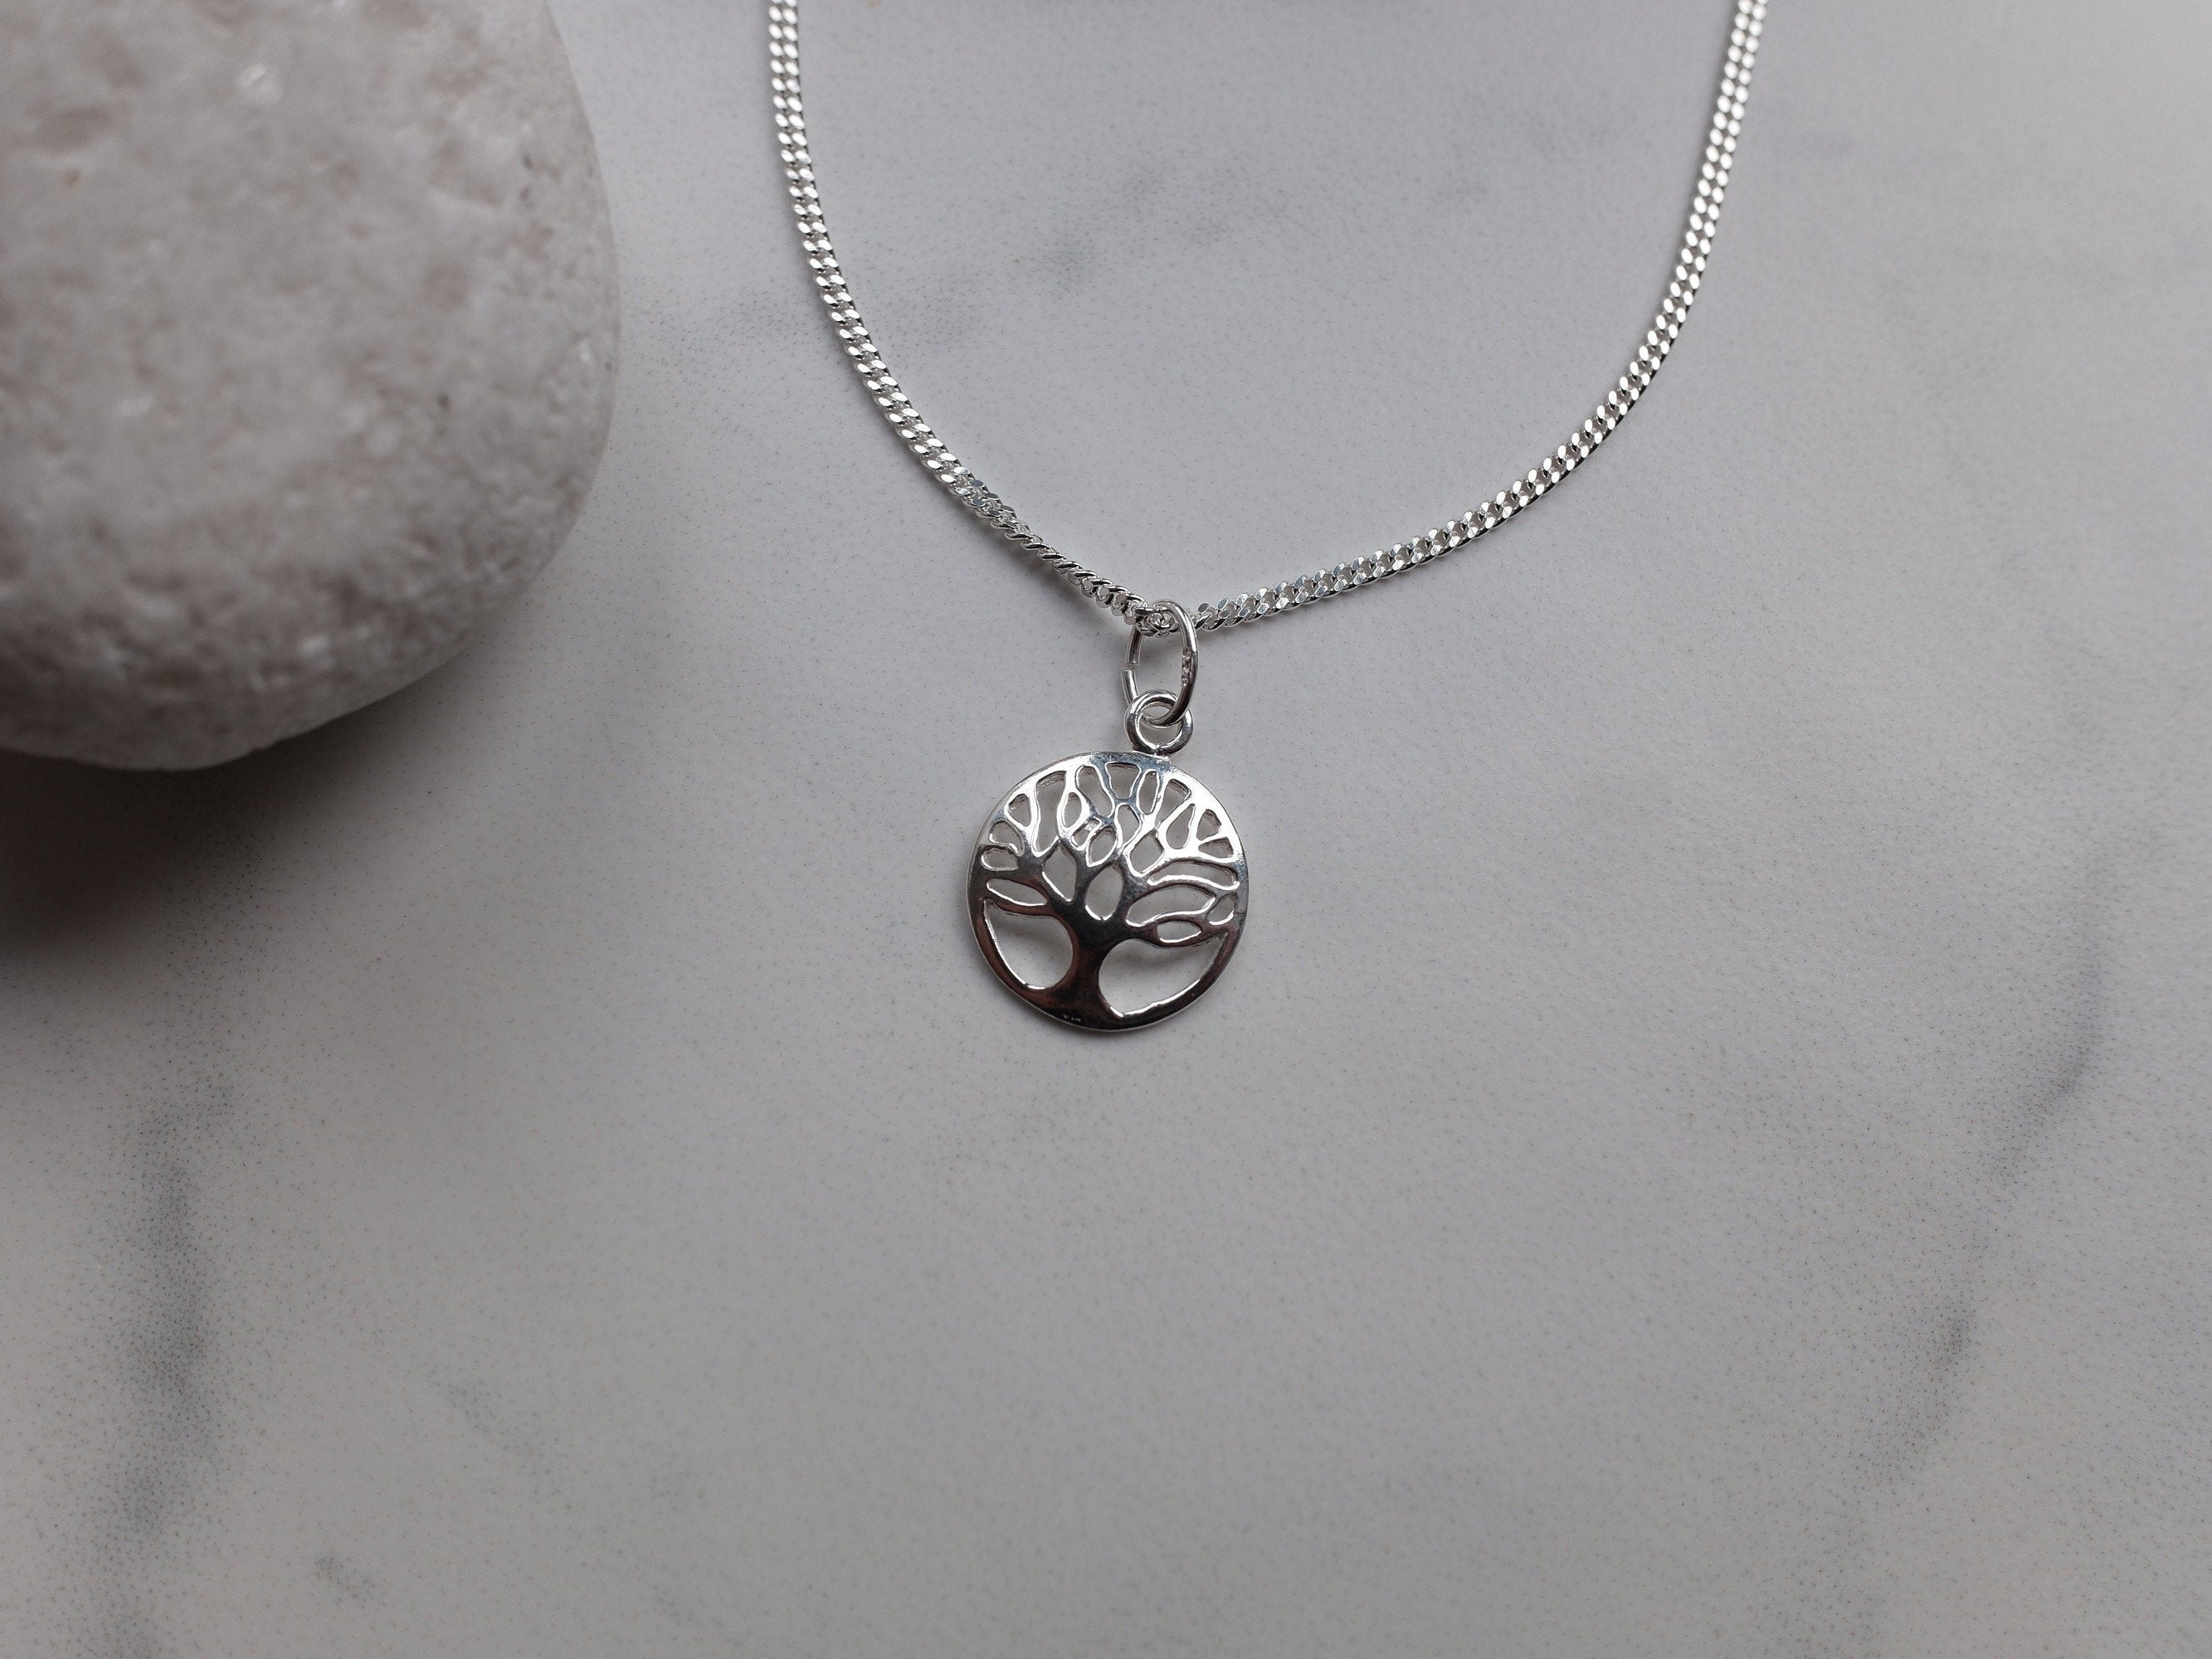 Sterling Silver Tree Of Life Charm Pendant Necklace - Diamond Cut Sterling Silver Chain - Boho Jewellery